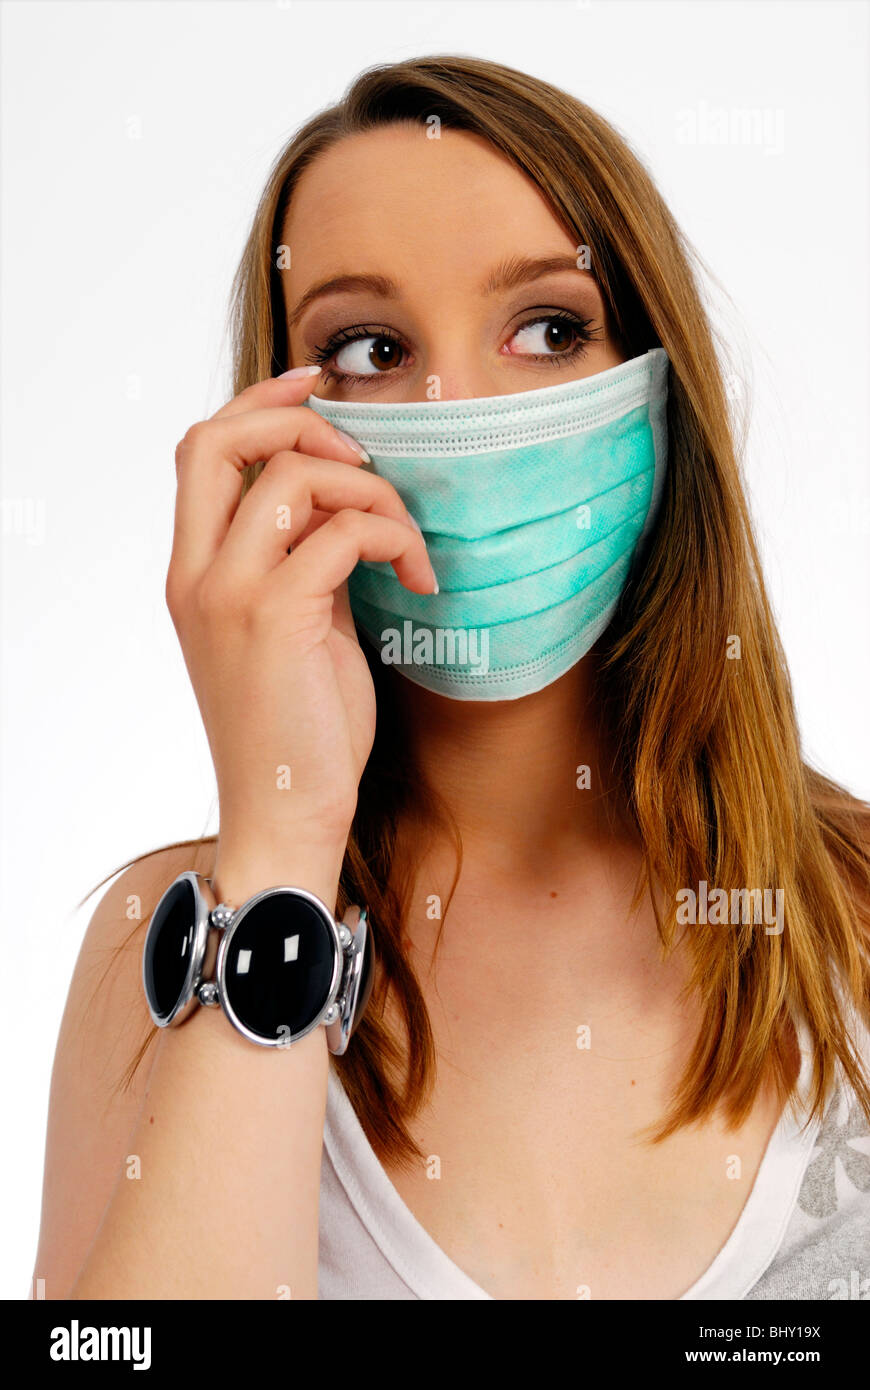 Woman with mouth guards, swine flu Stock Photo